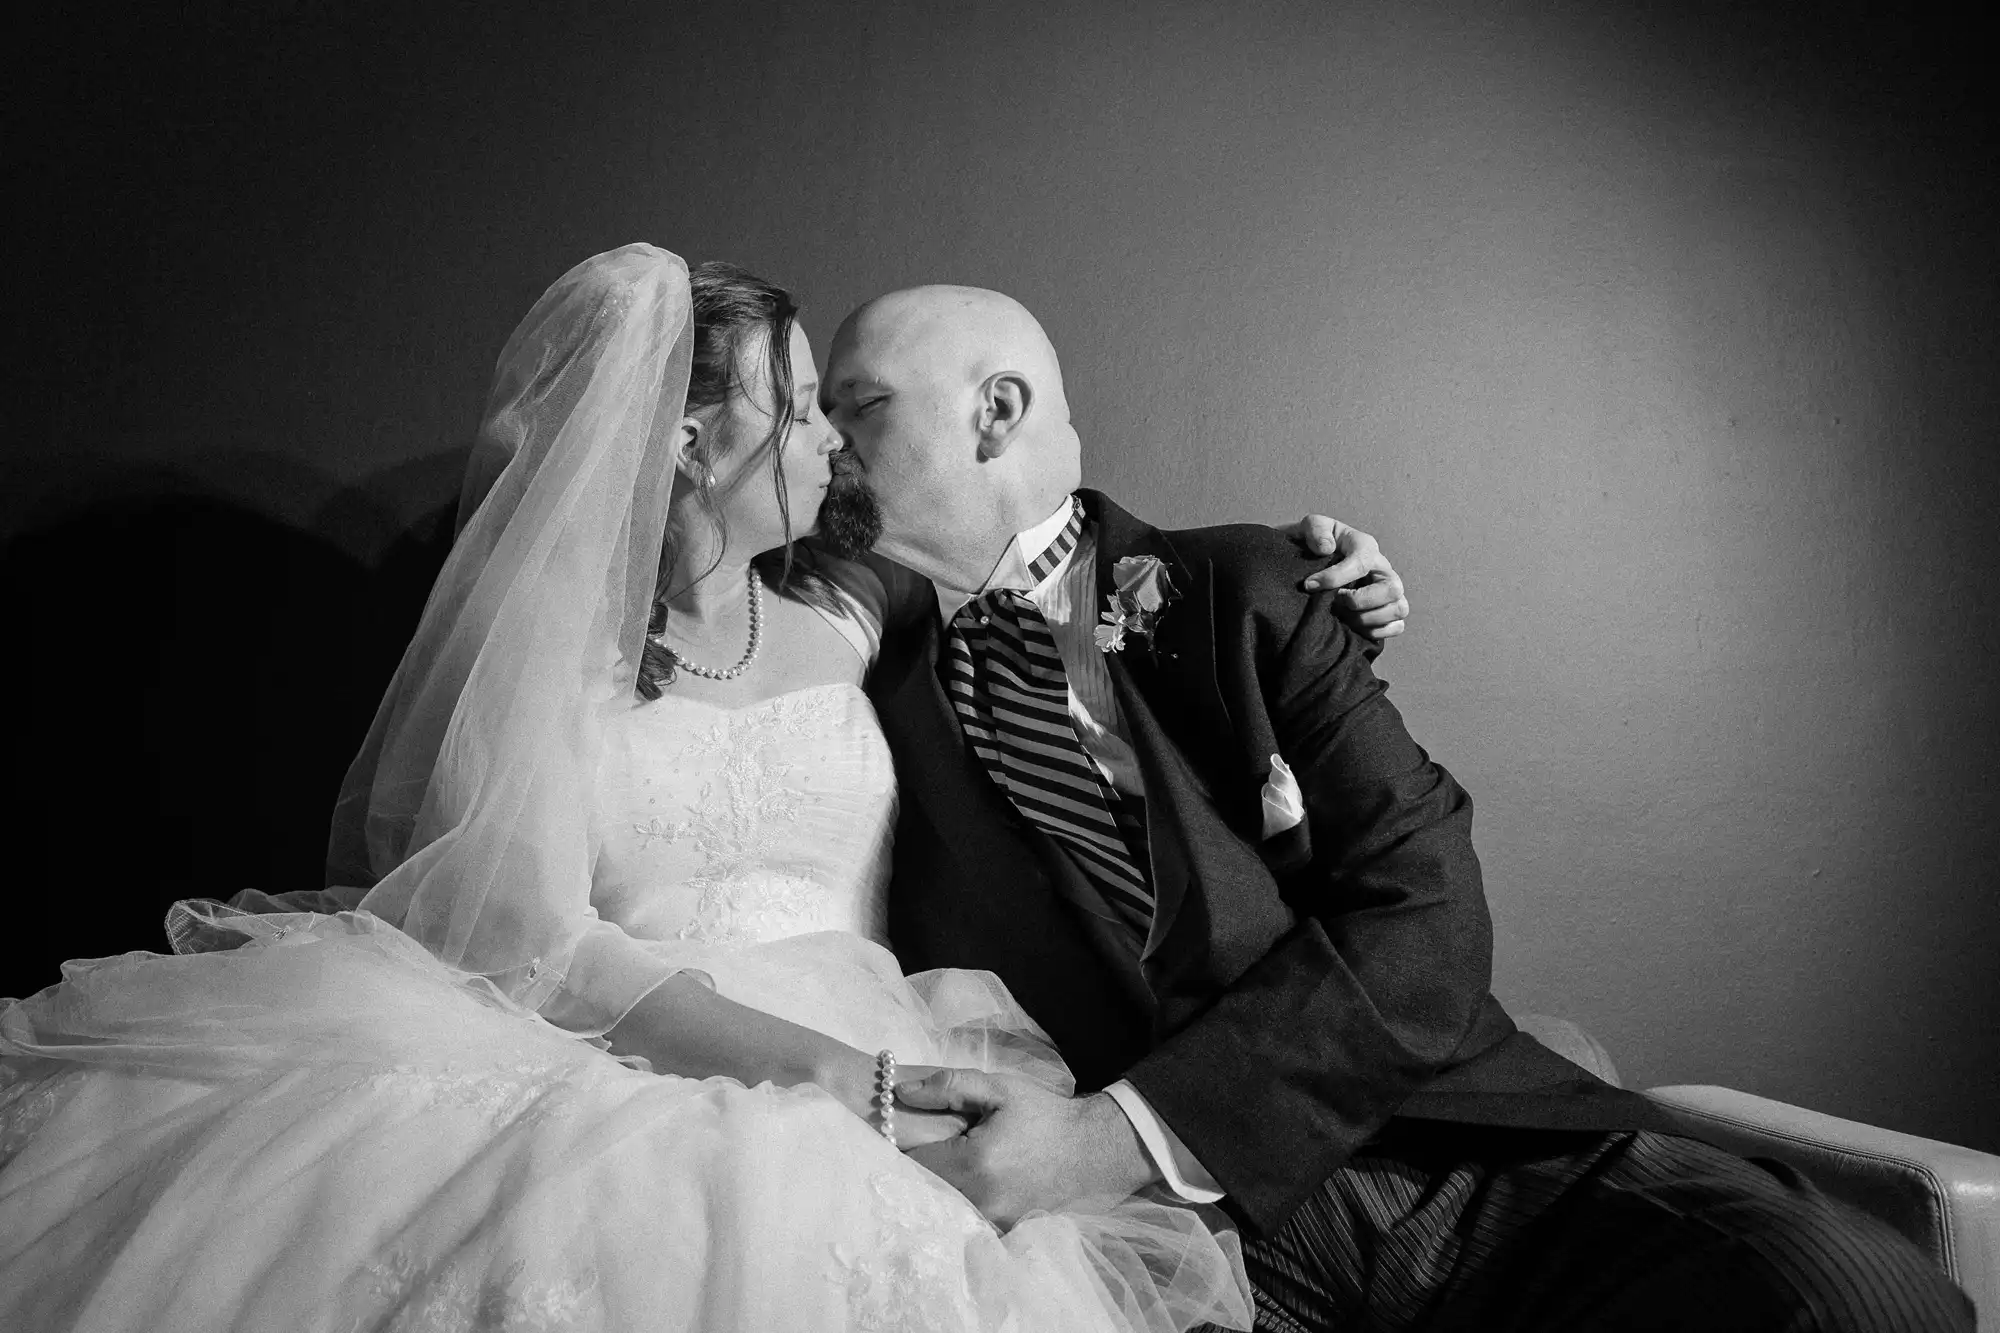 A bride and groom share a tender kiss, seated closely, in a black and white photograph.